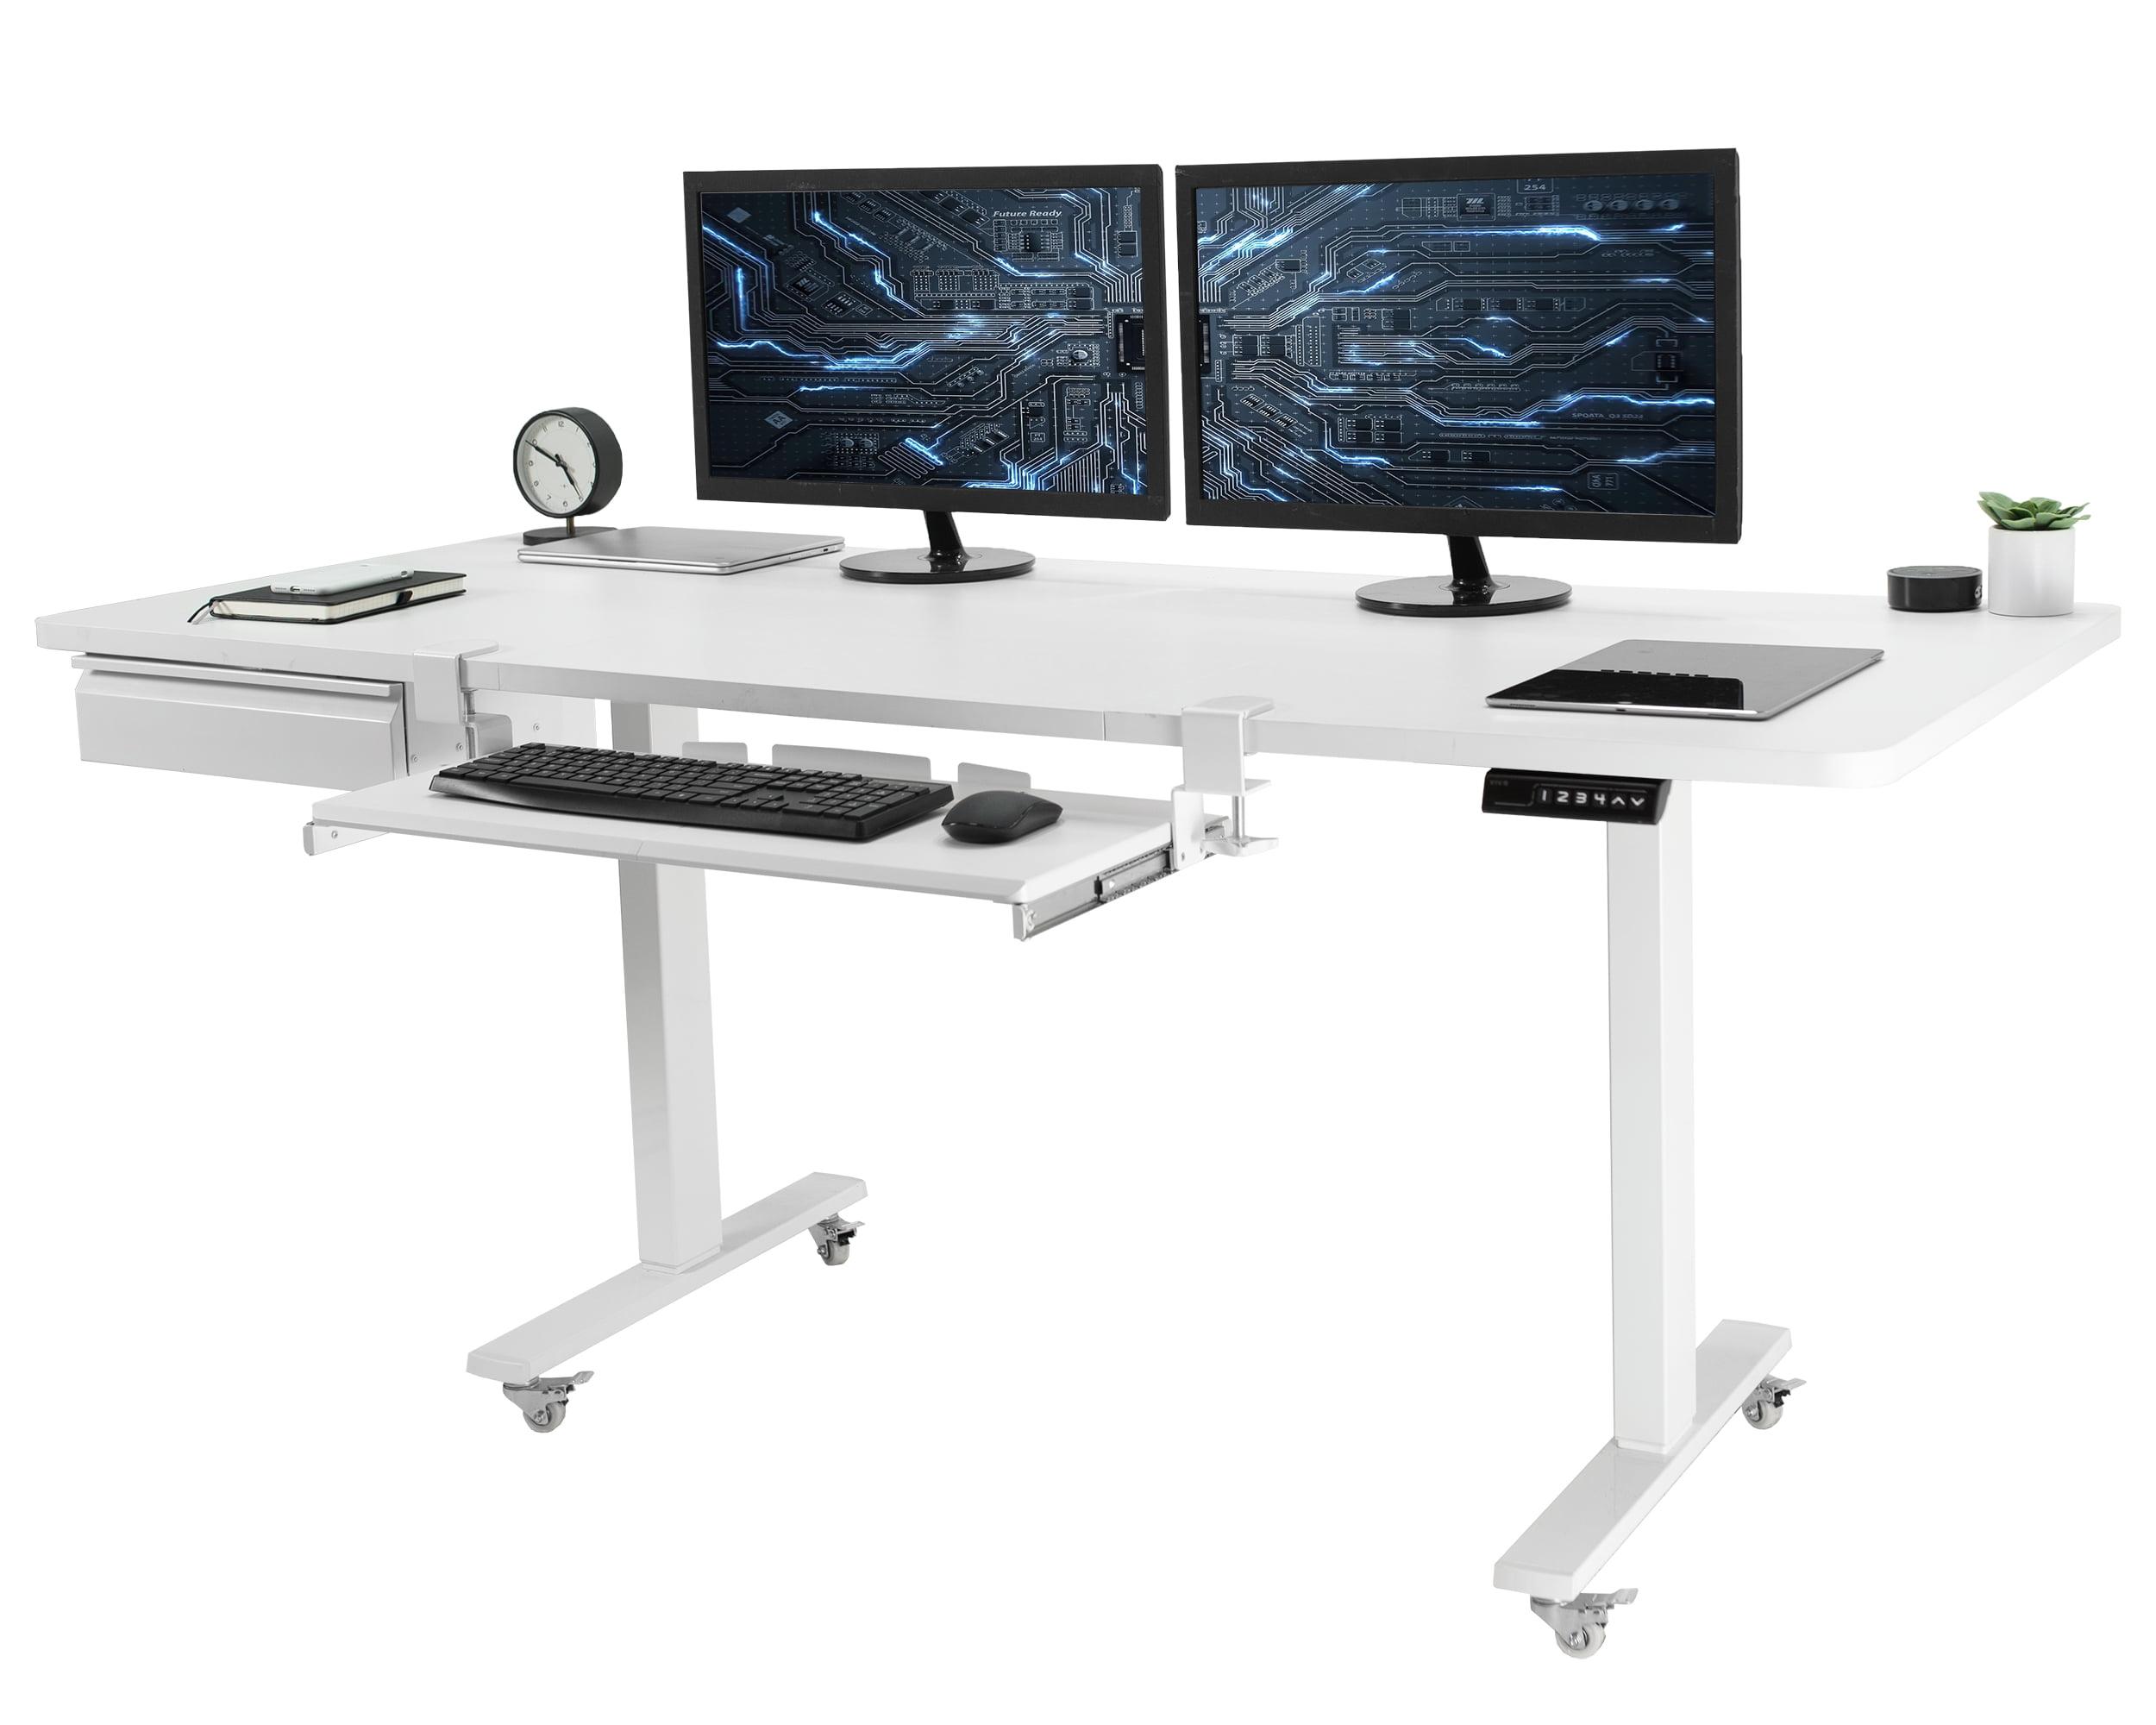 Elevate 71" White Electric Adjustable Desk with Drawer & Keyboard Tray